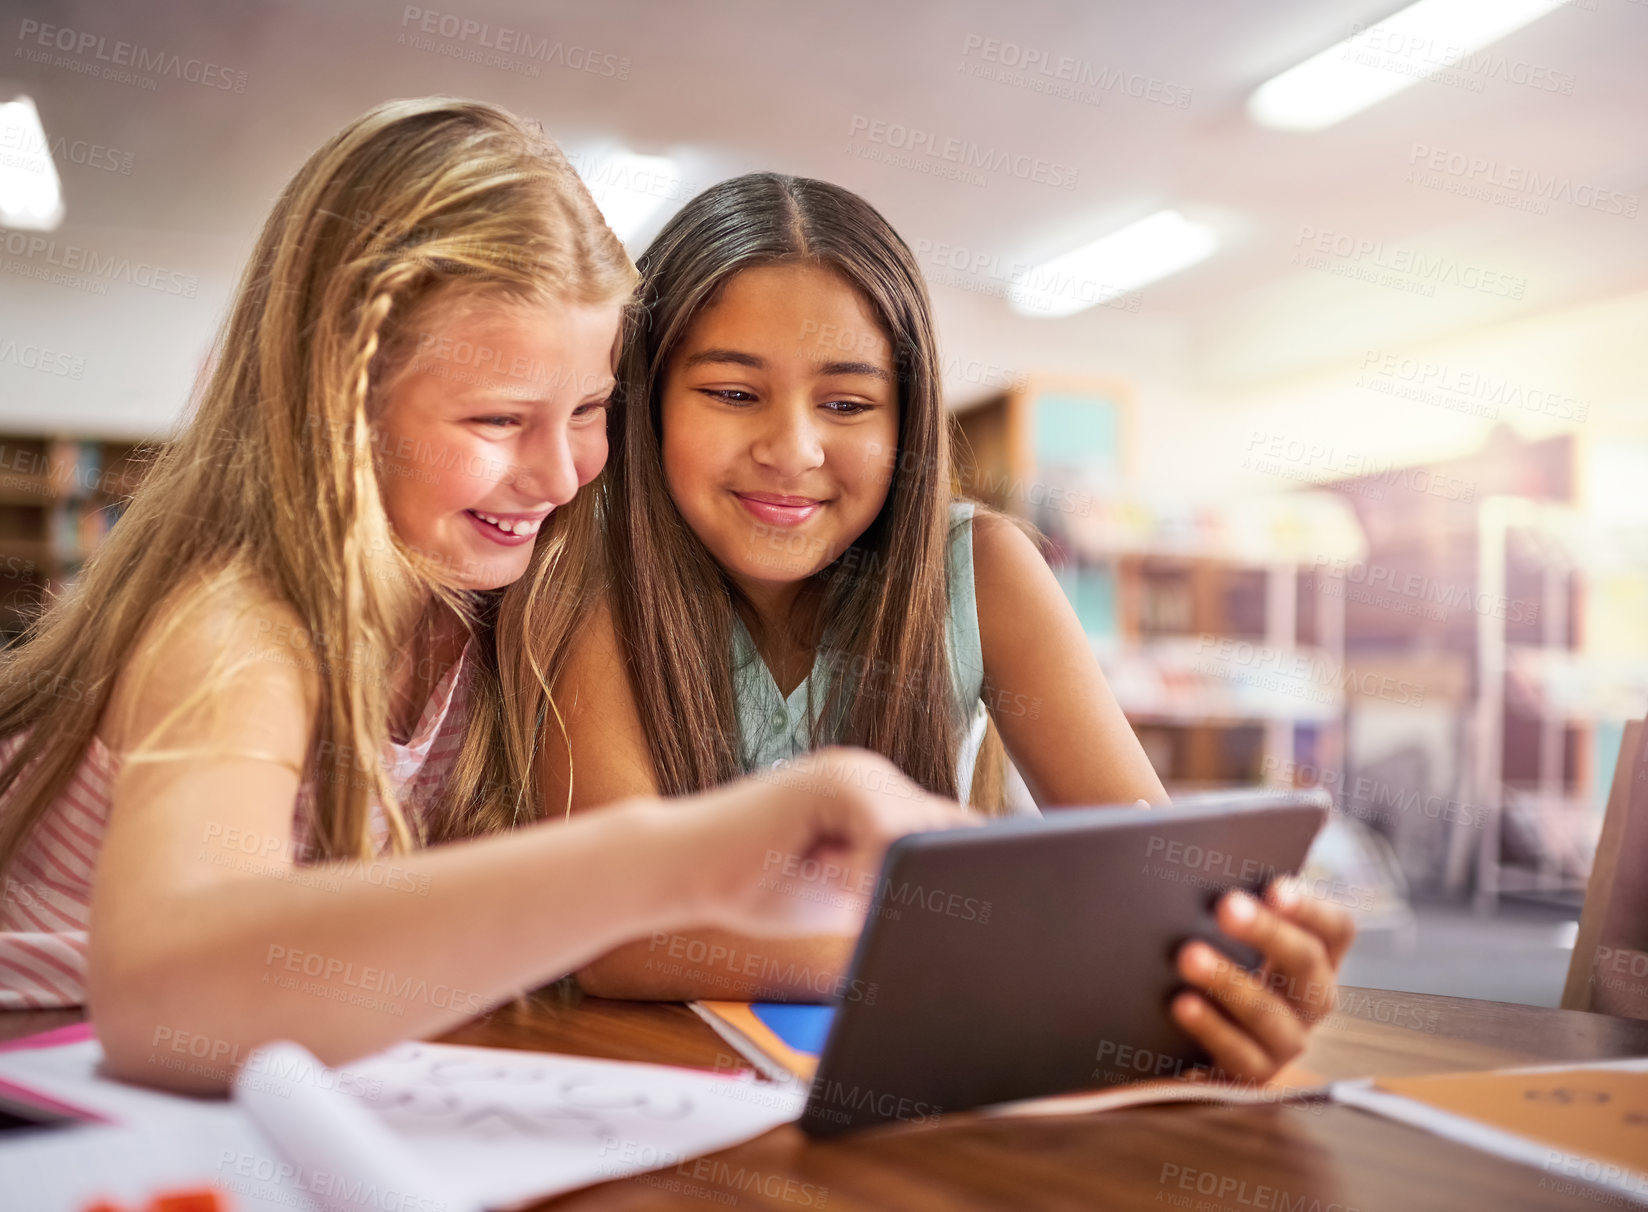 Buy stock photo Shot of two young girls using a digital tablet at school